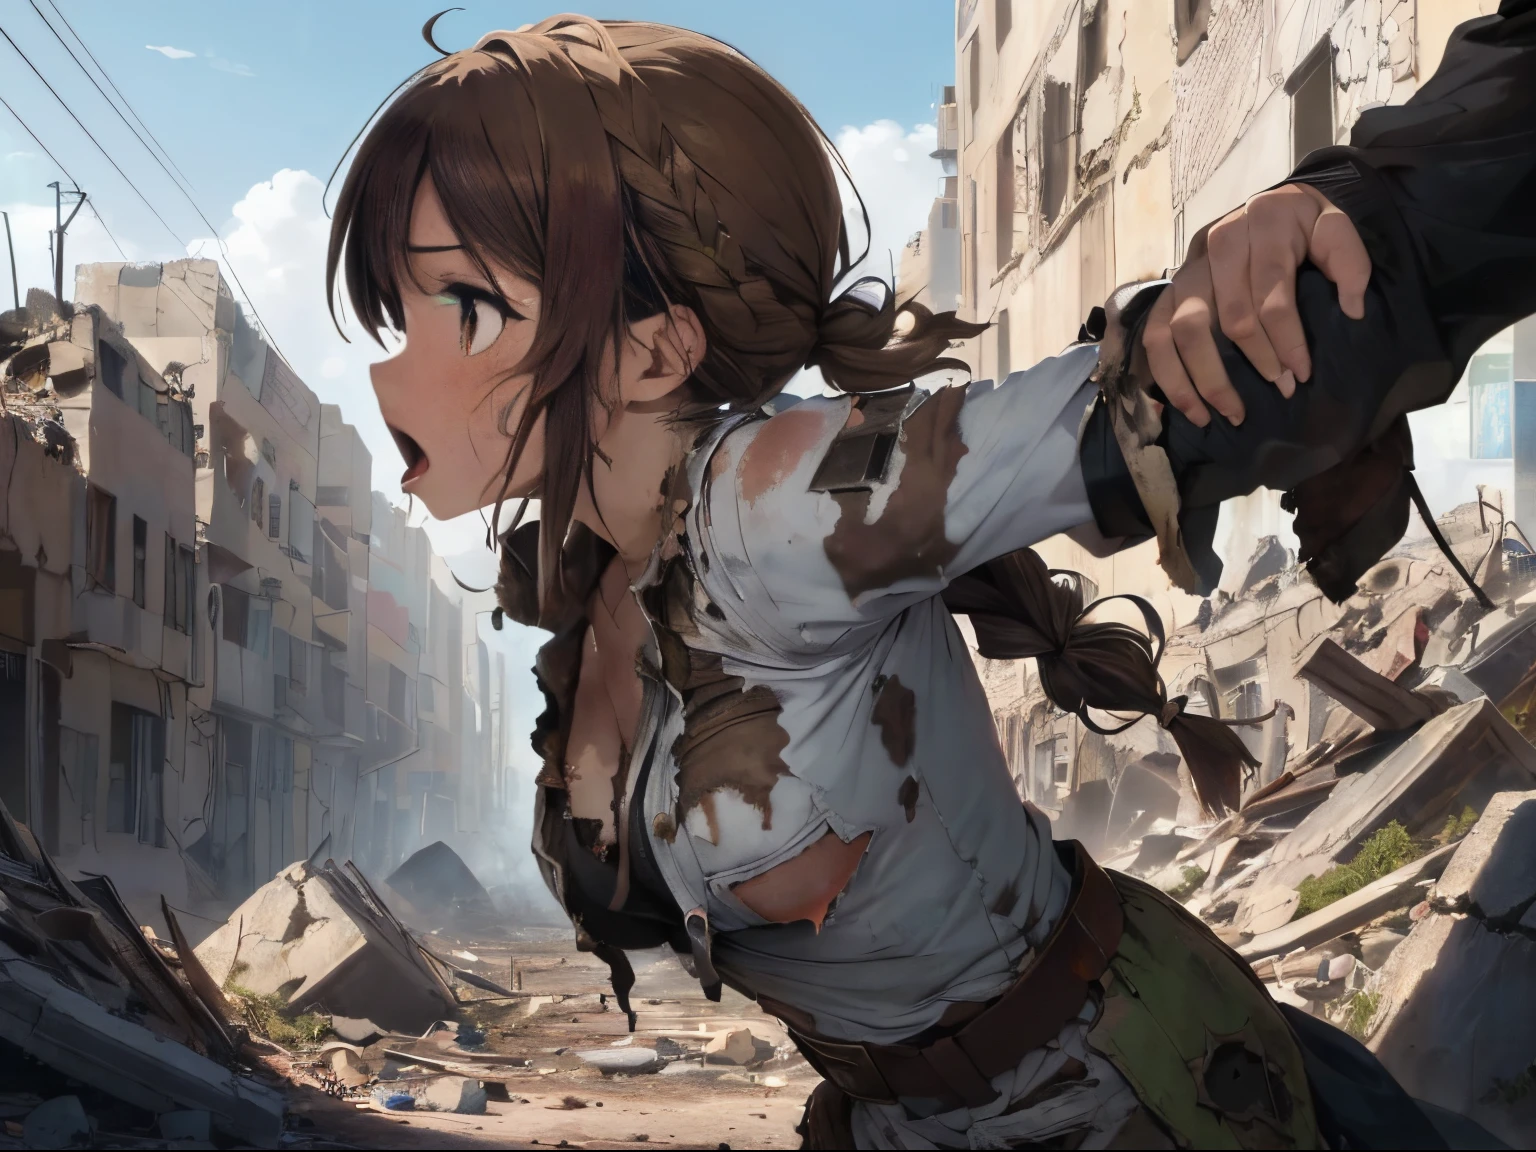 ((A ruined city full of rubble)),(After the war),((Vast landscape full of rubble)),(wearing tattered slave-like clothes),((Brown hair)),(Braided shorthair),((Brown eyes)),((profile)),((Horizontal line of sight)),(Surprised face),((Surprise Mark)),((astonishing)),((I opened my mouth wide in surprise.)),((Surrounded by multiple men)),(((being attacked by someone&#39;being grabbed by the arm or hair)))